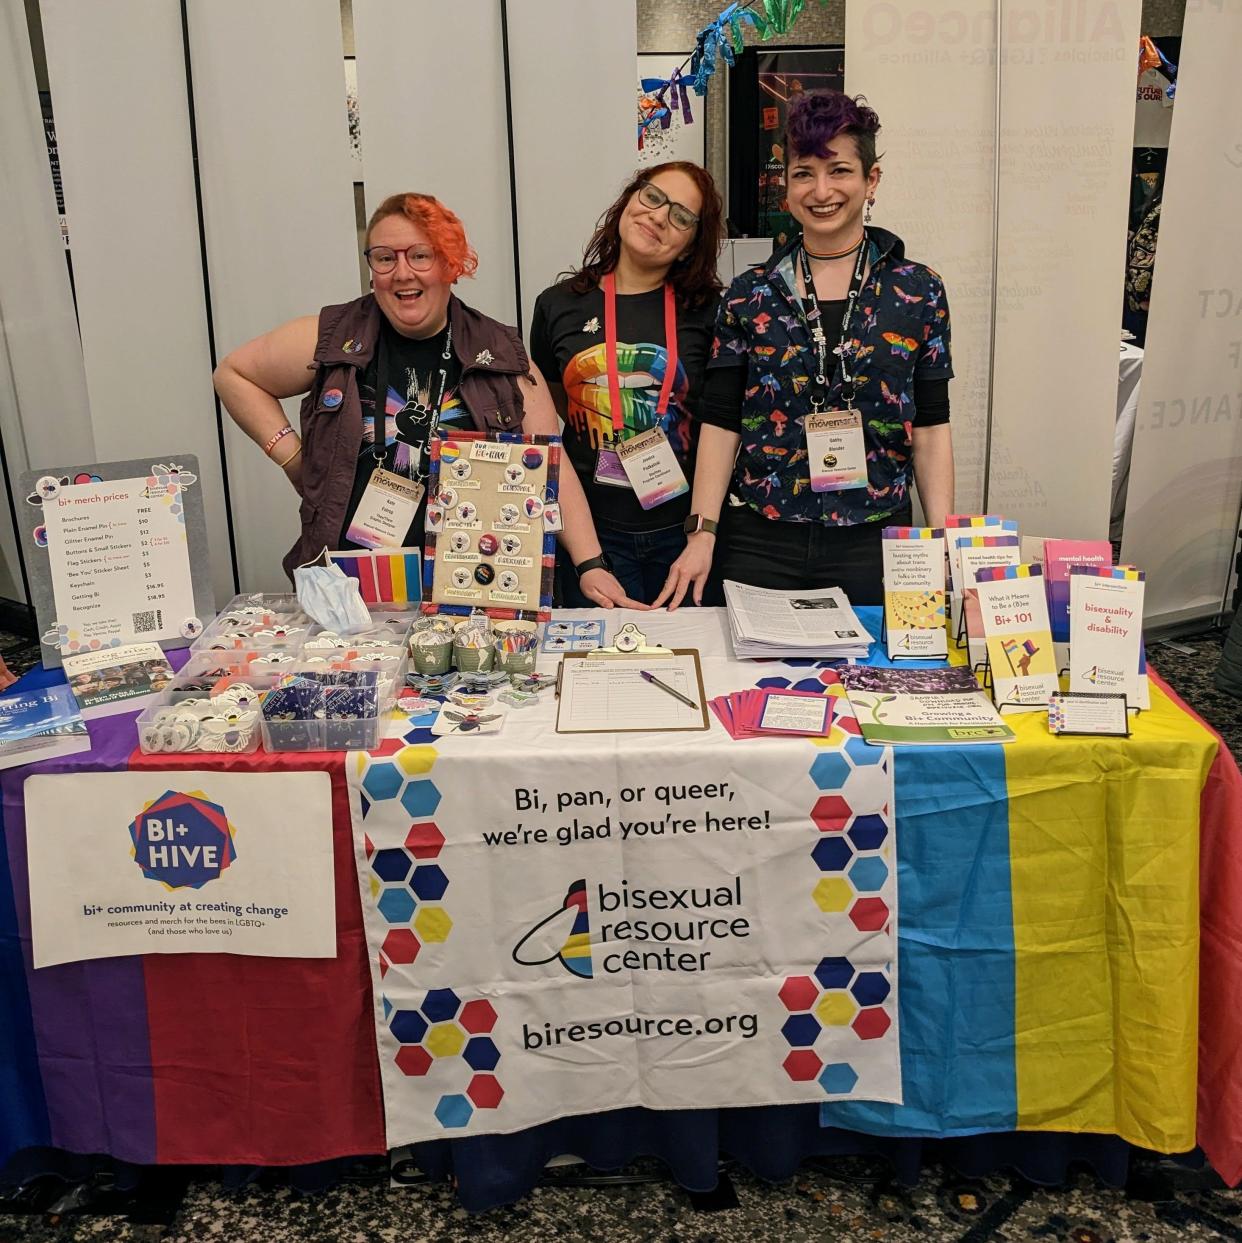 The Bi Resource Center connects the bi+ community through resource, support and celebration.